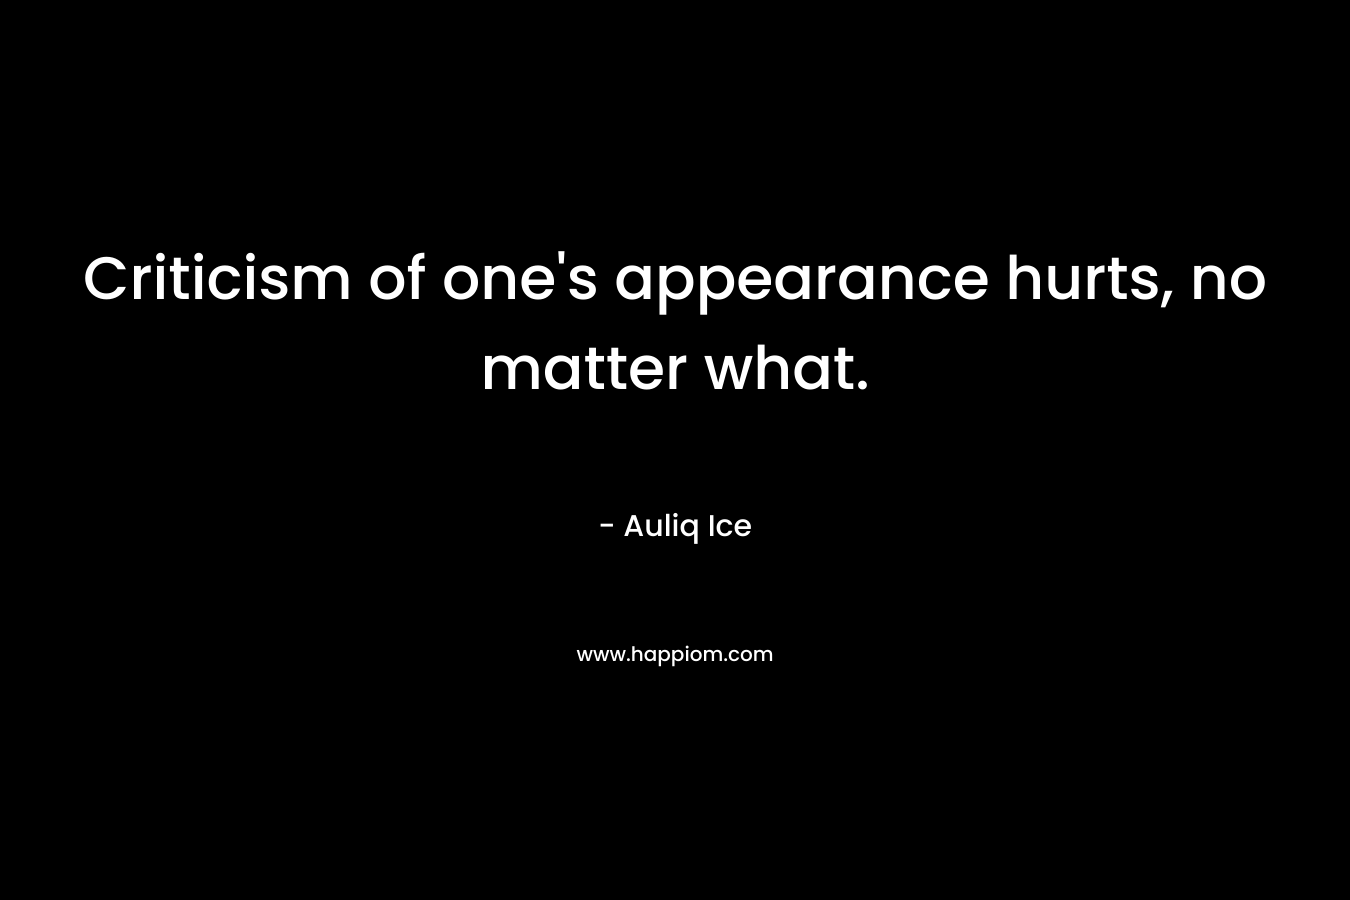 Criticism of one’s appearance hurts, no matter what. – Auliq Ice